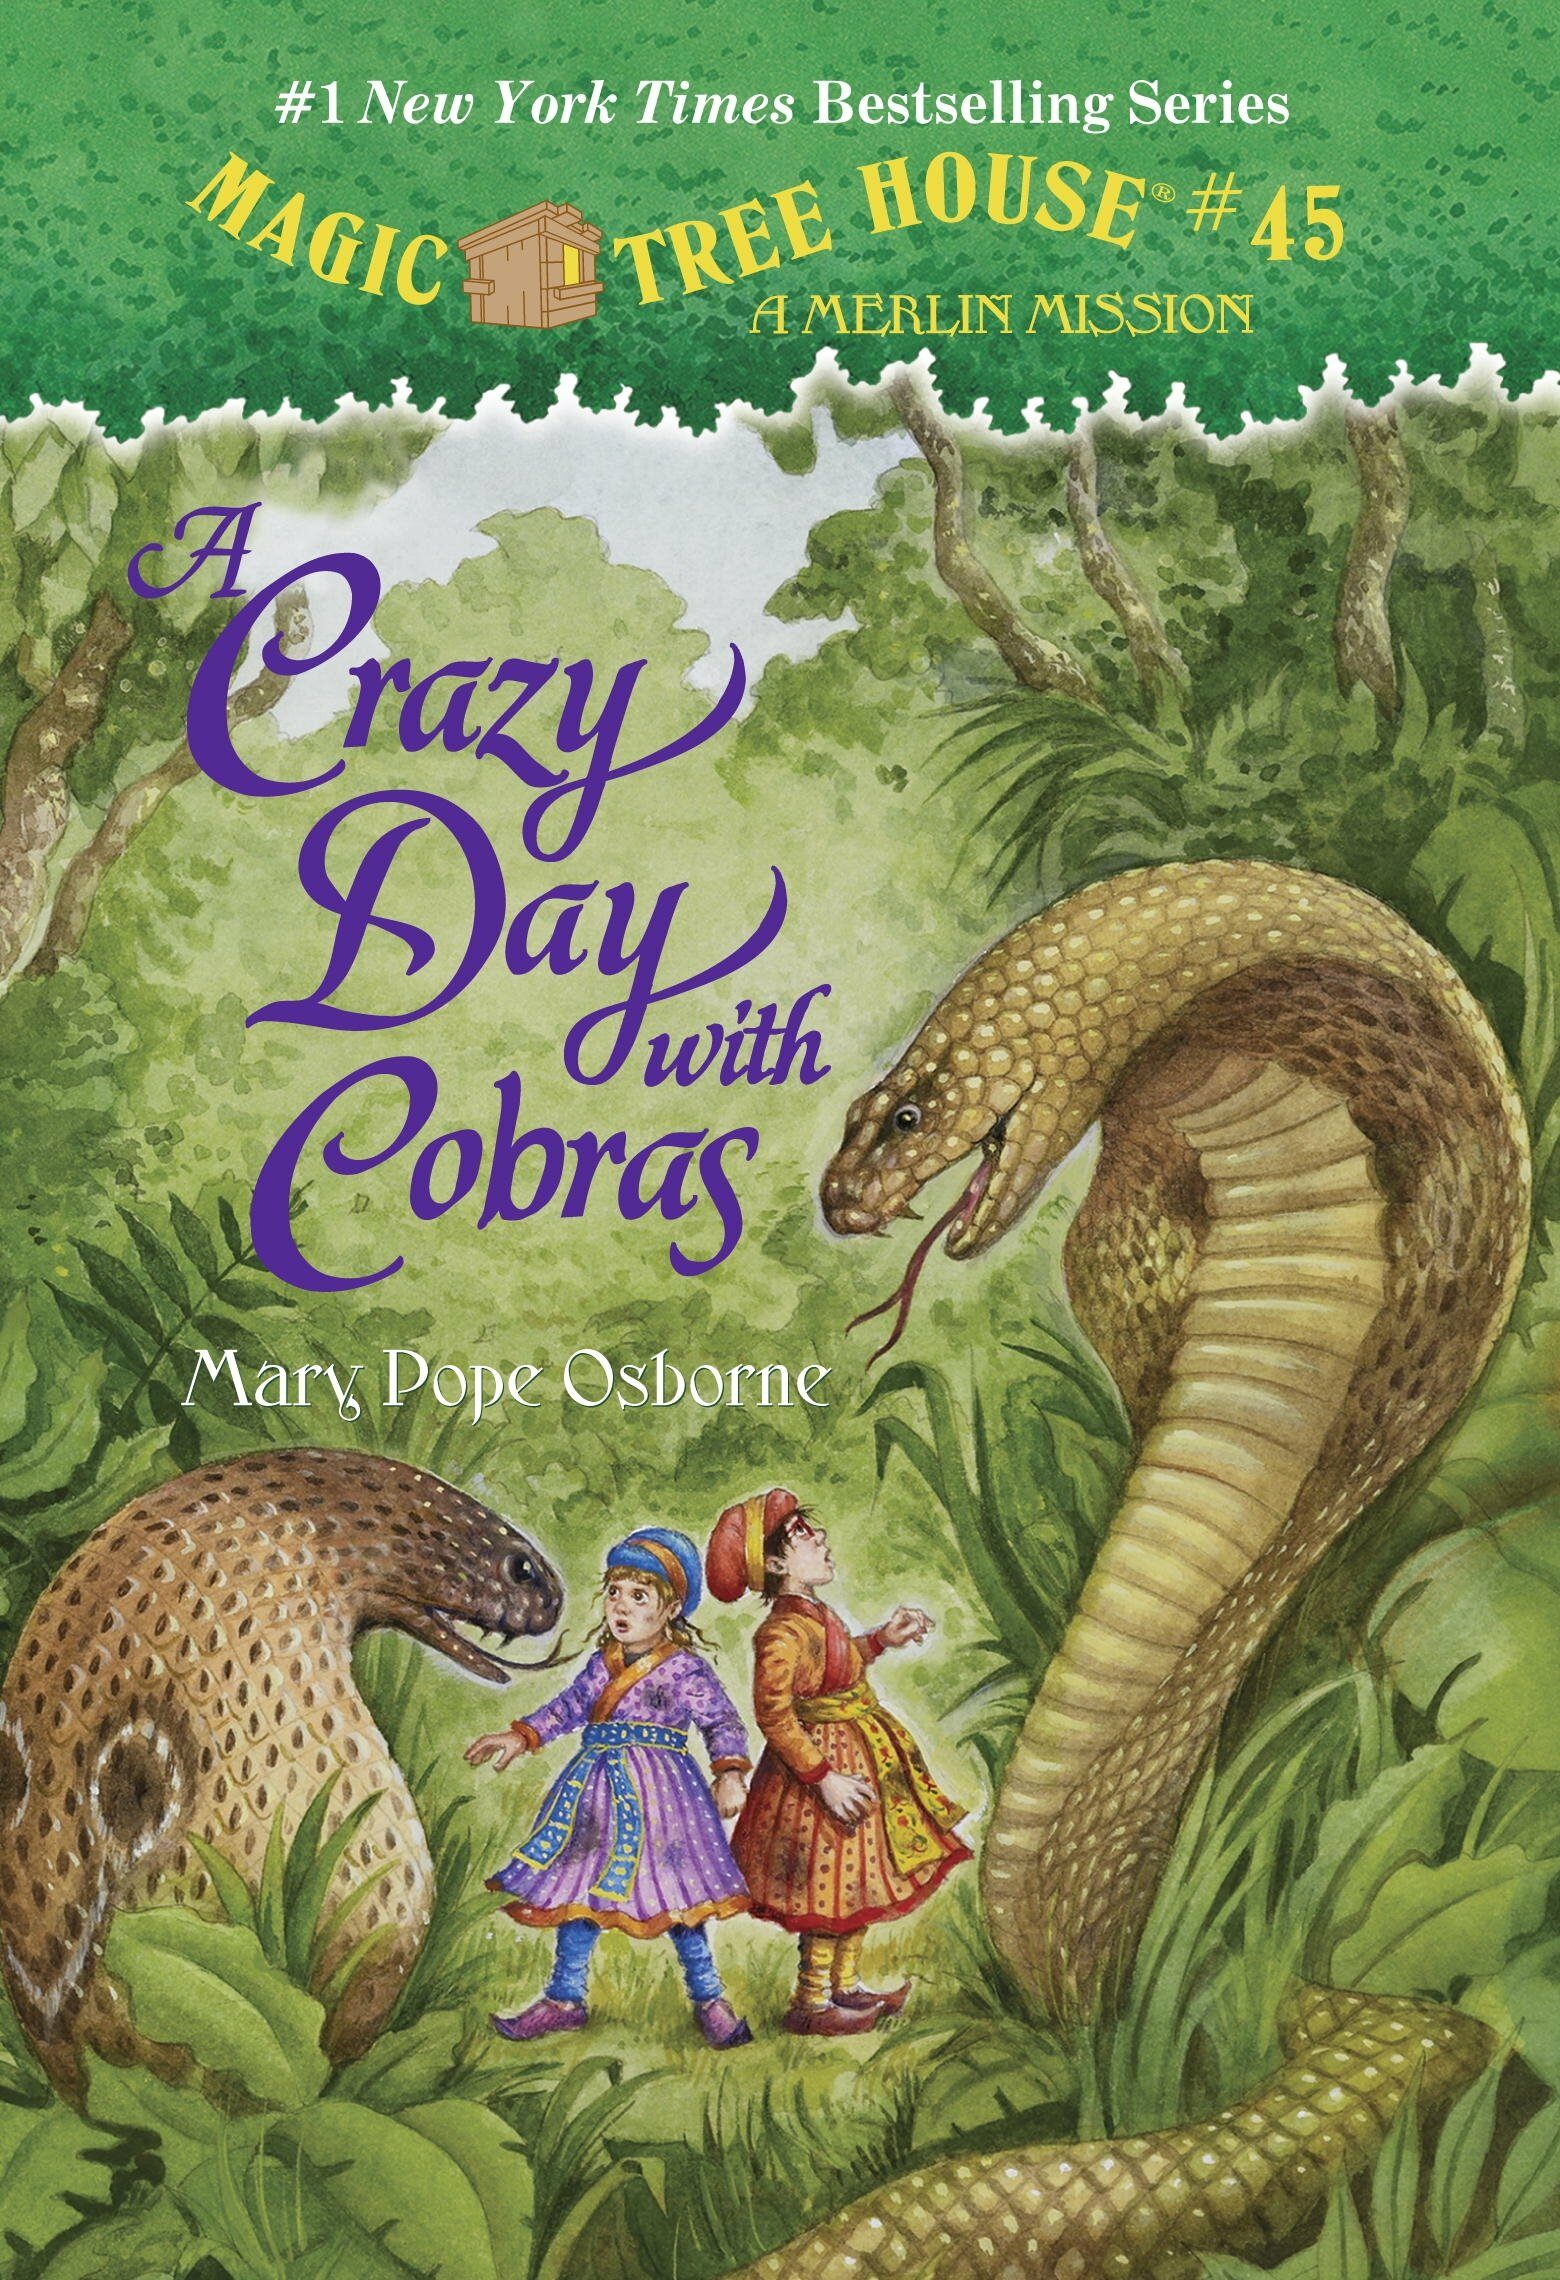 Magic Tree House #45 :  A Crazy Day with Cobras (Paperback)